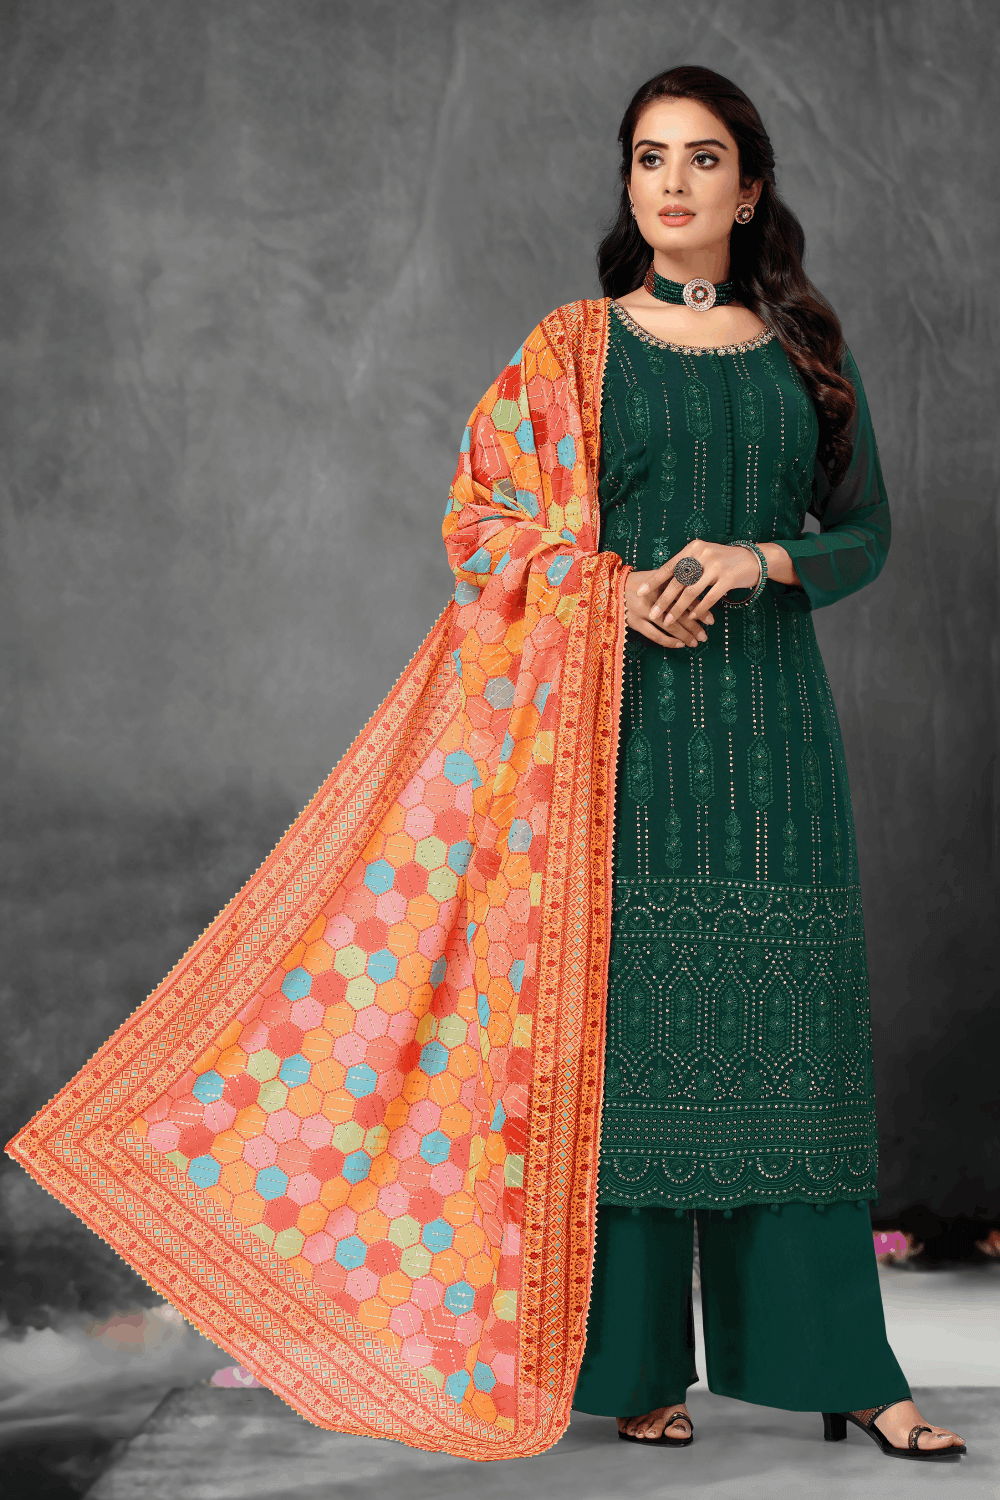 Bottle Green Sequins, Thread, Beads and Stone work Salwar Suit with Palazzo Pants - Seasons Chennai